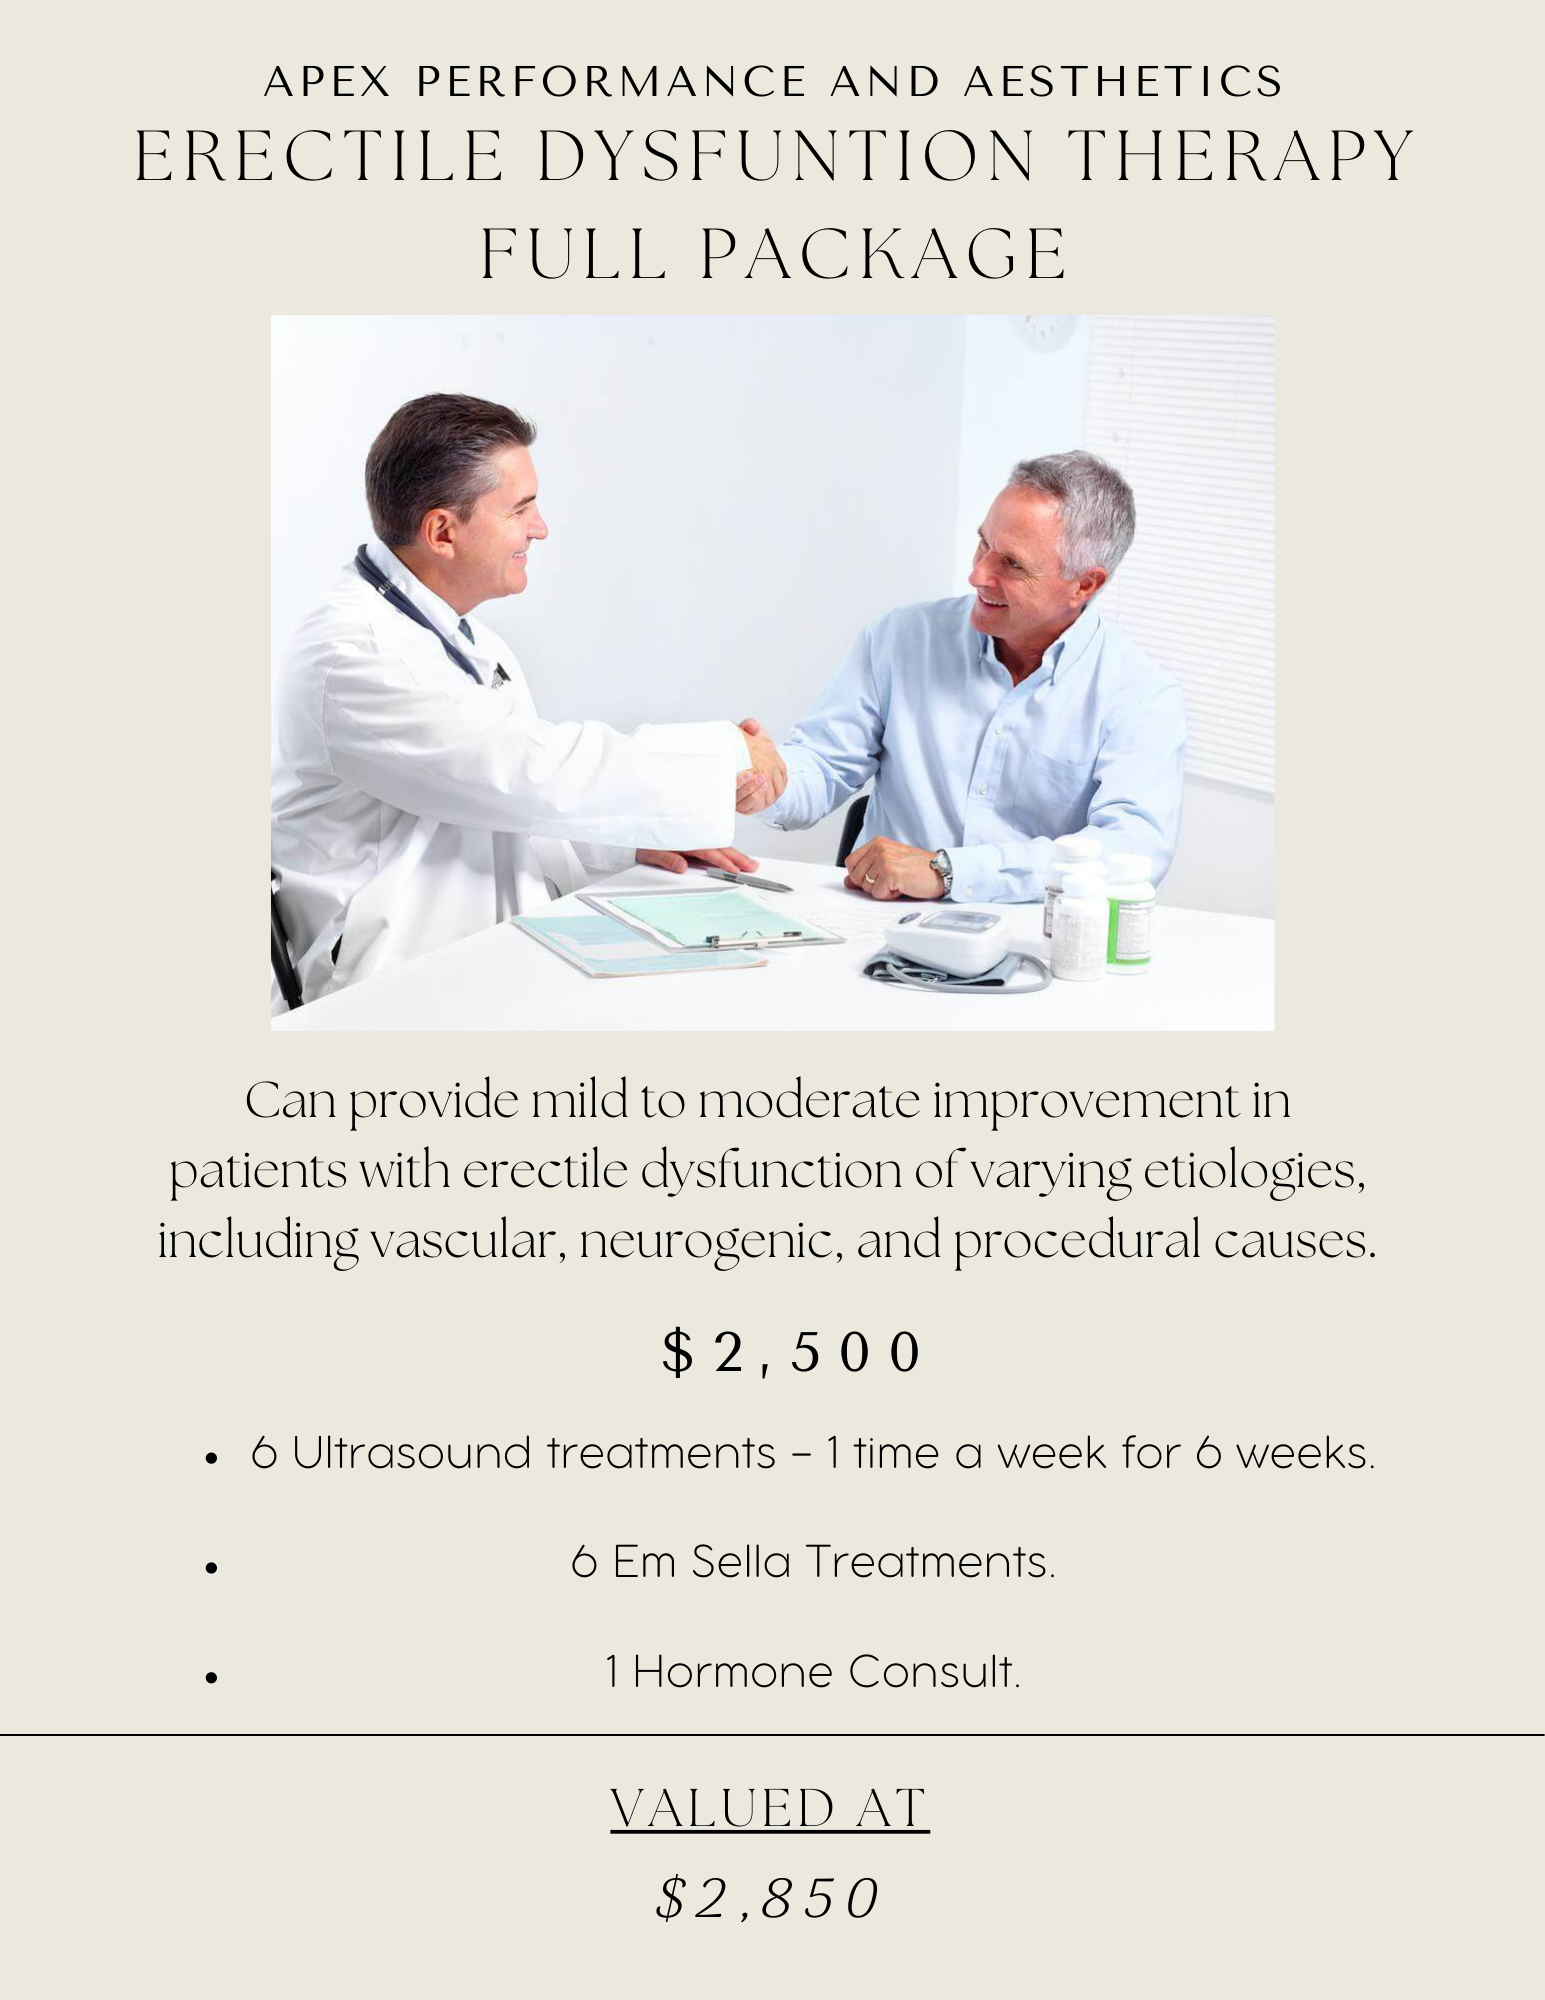 Erectile Dysfunction Therapy FULL Package | APEX Performance & Aesthetics in Sandy, UT